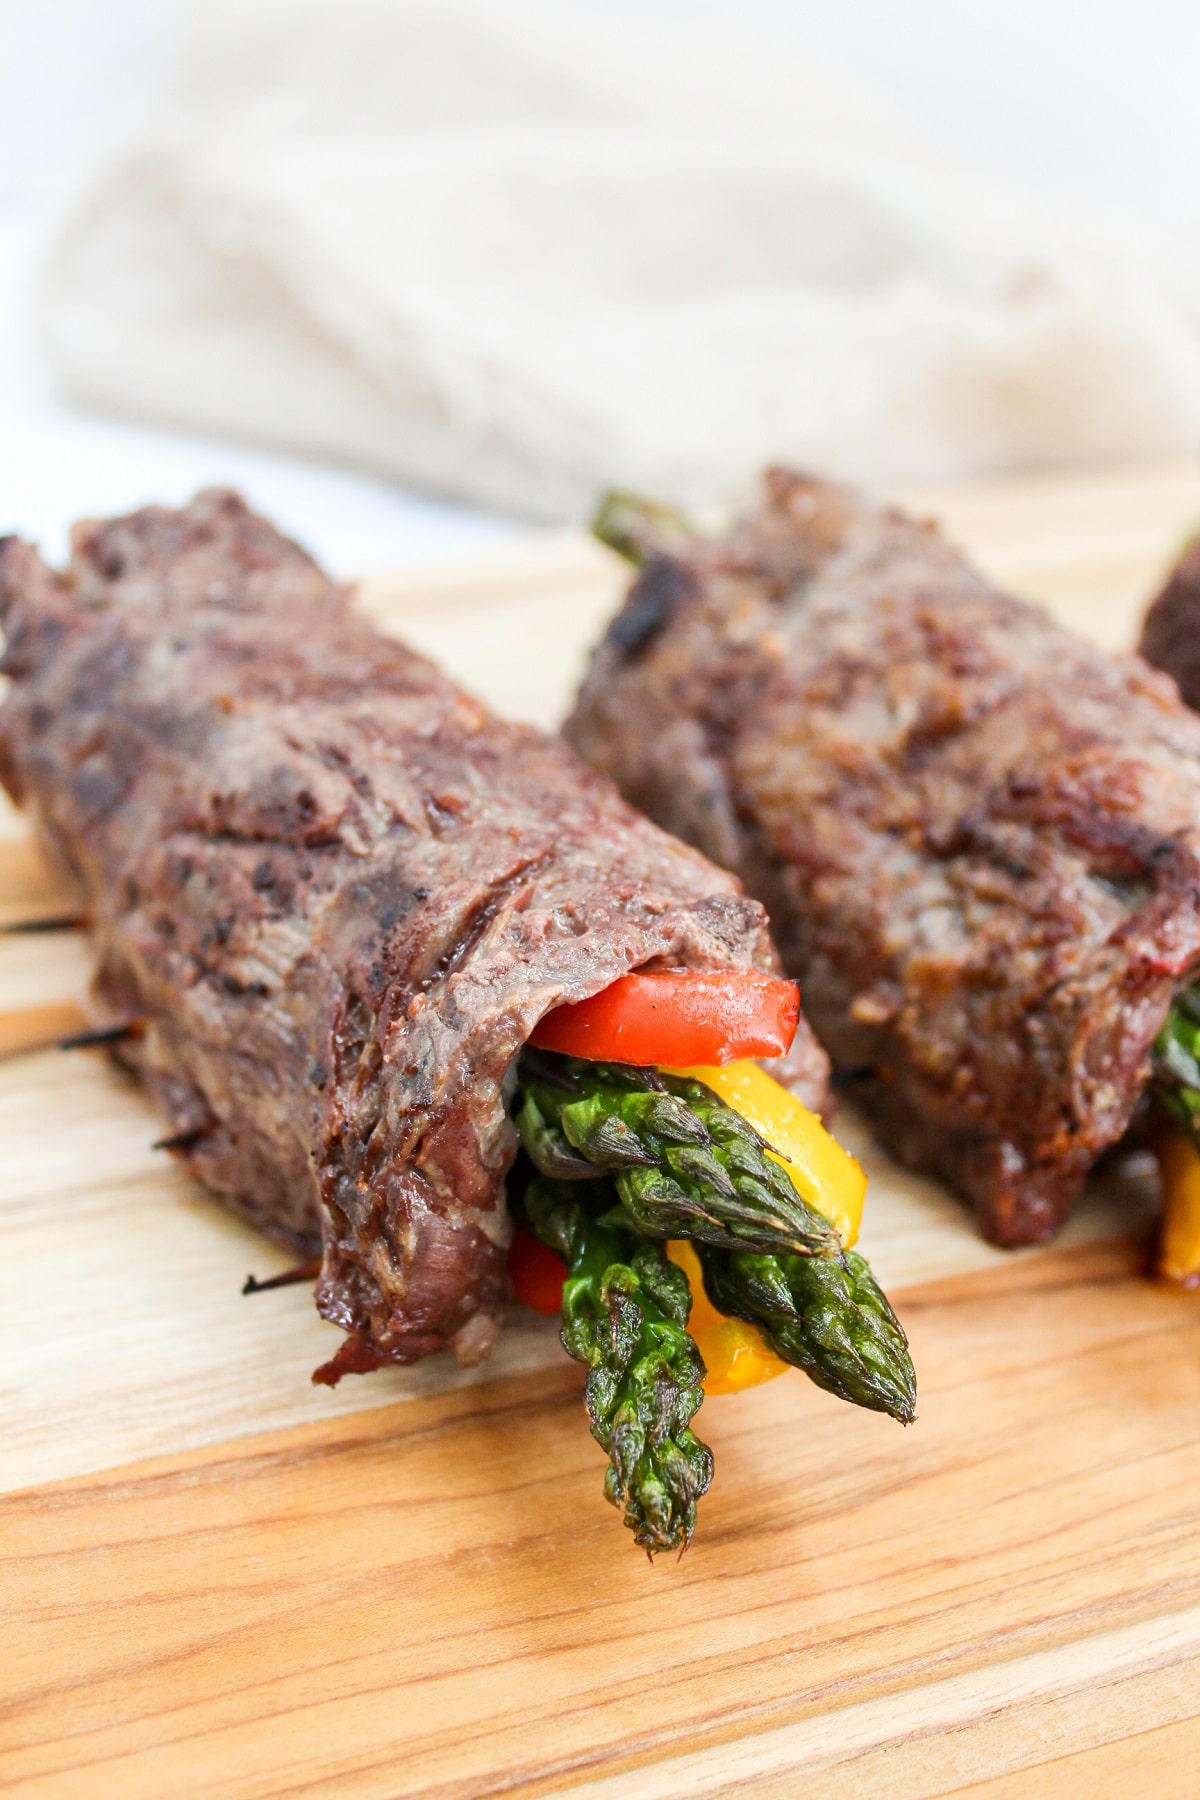 steak and asparagus roll-ups on a cutting board